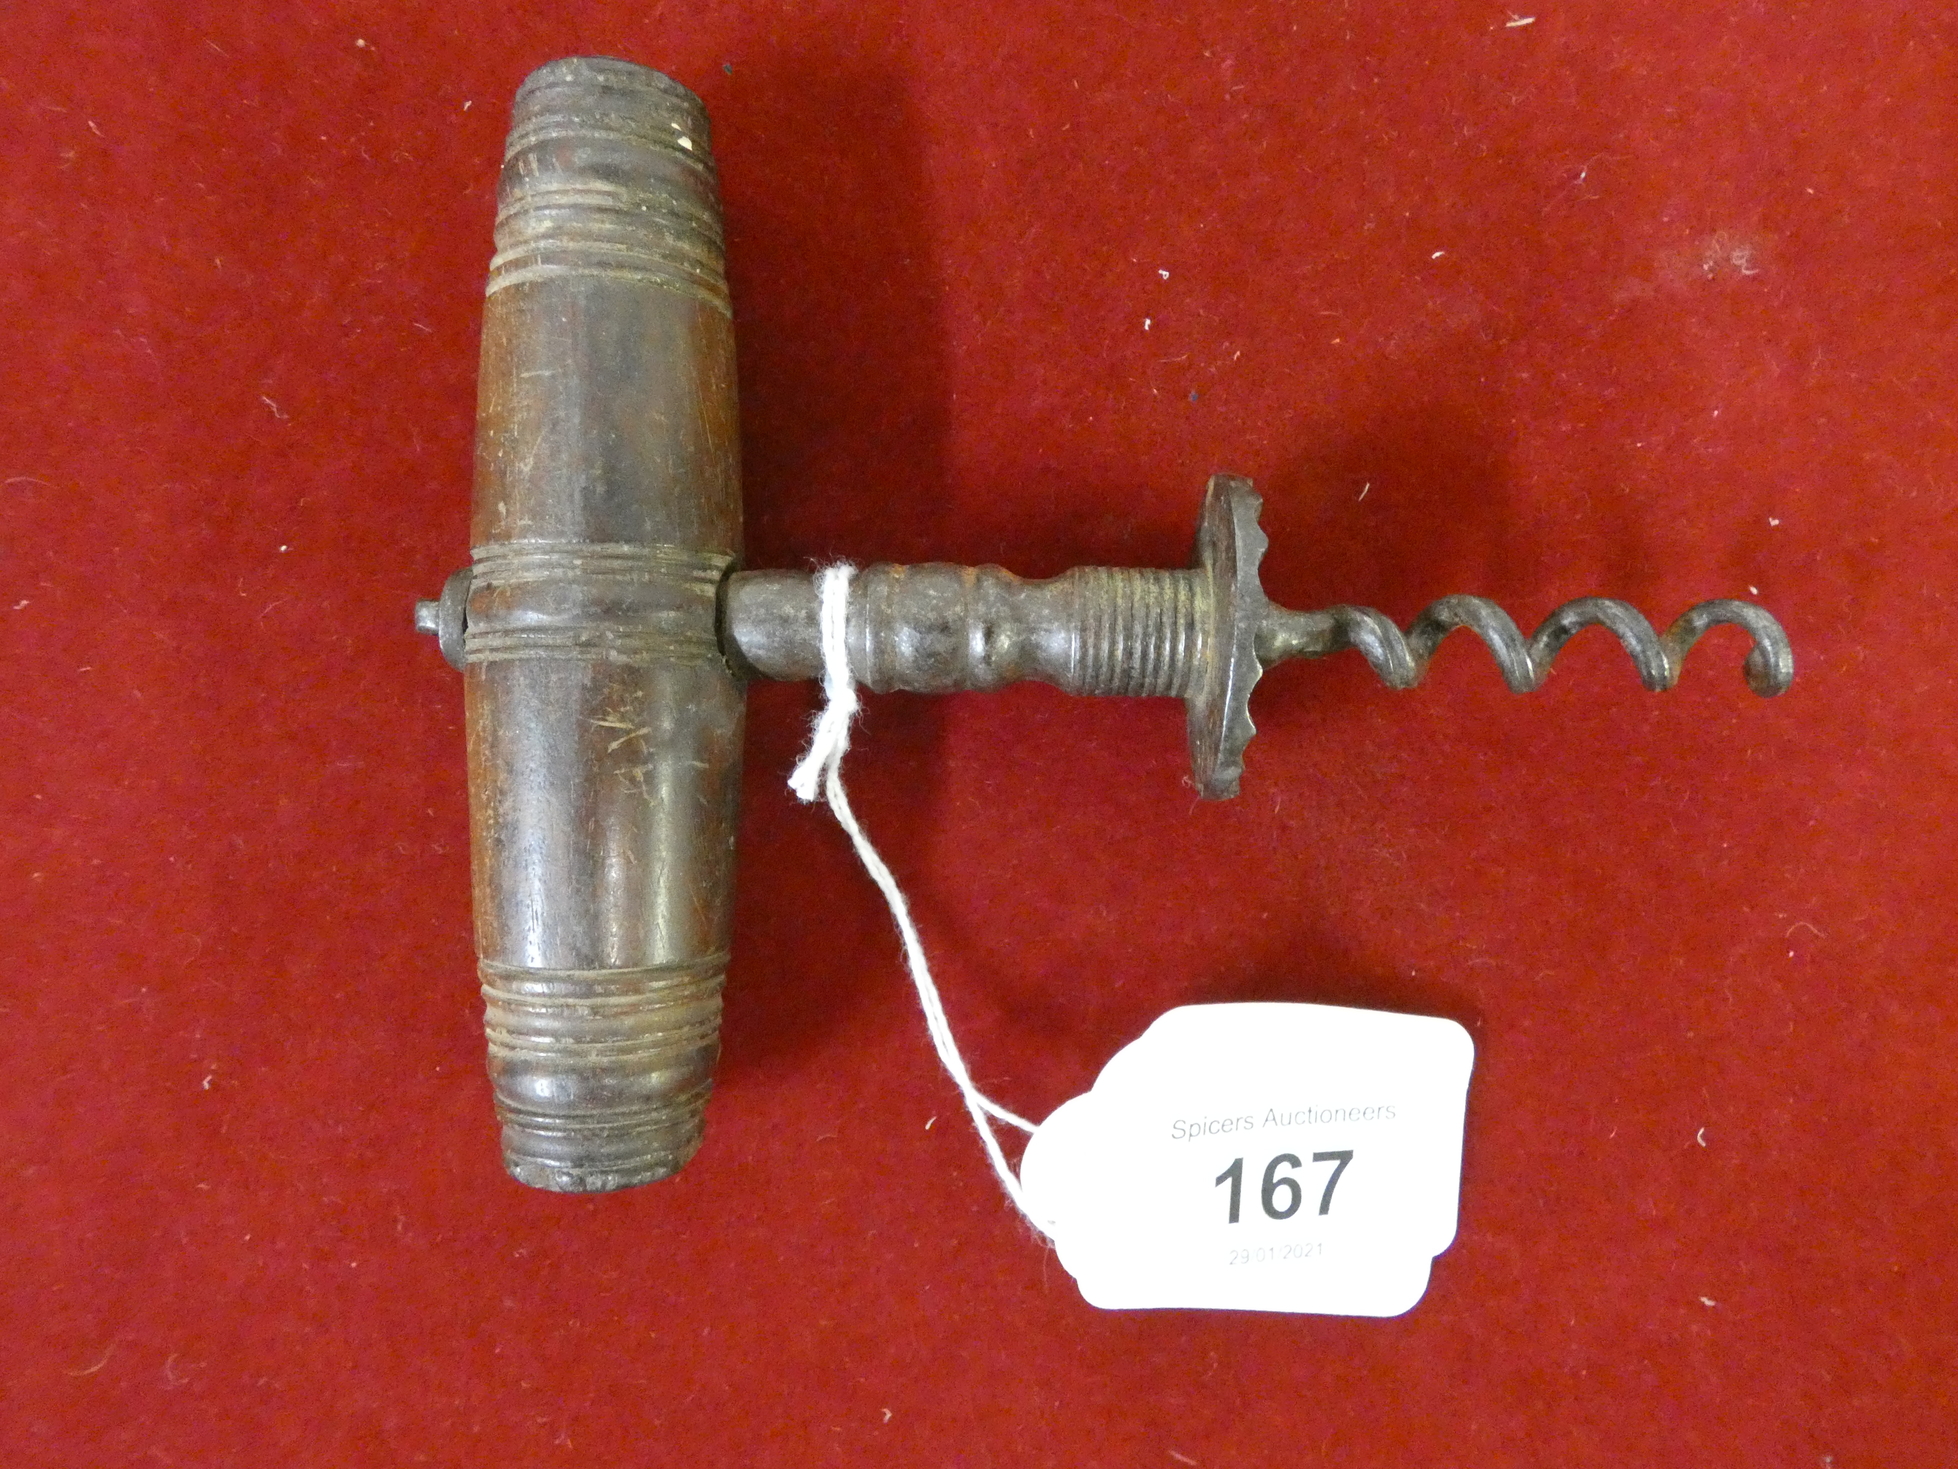 A Victorian Henshaw type direct pull corkscrew, the rosewood handle lacking the hair.